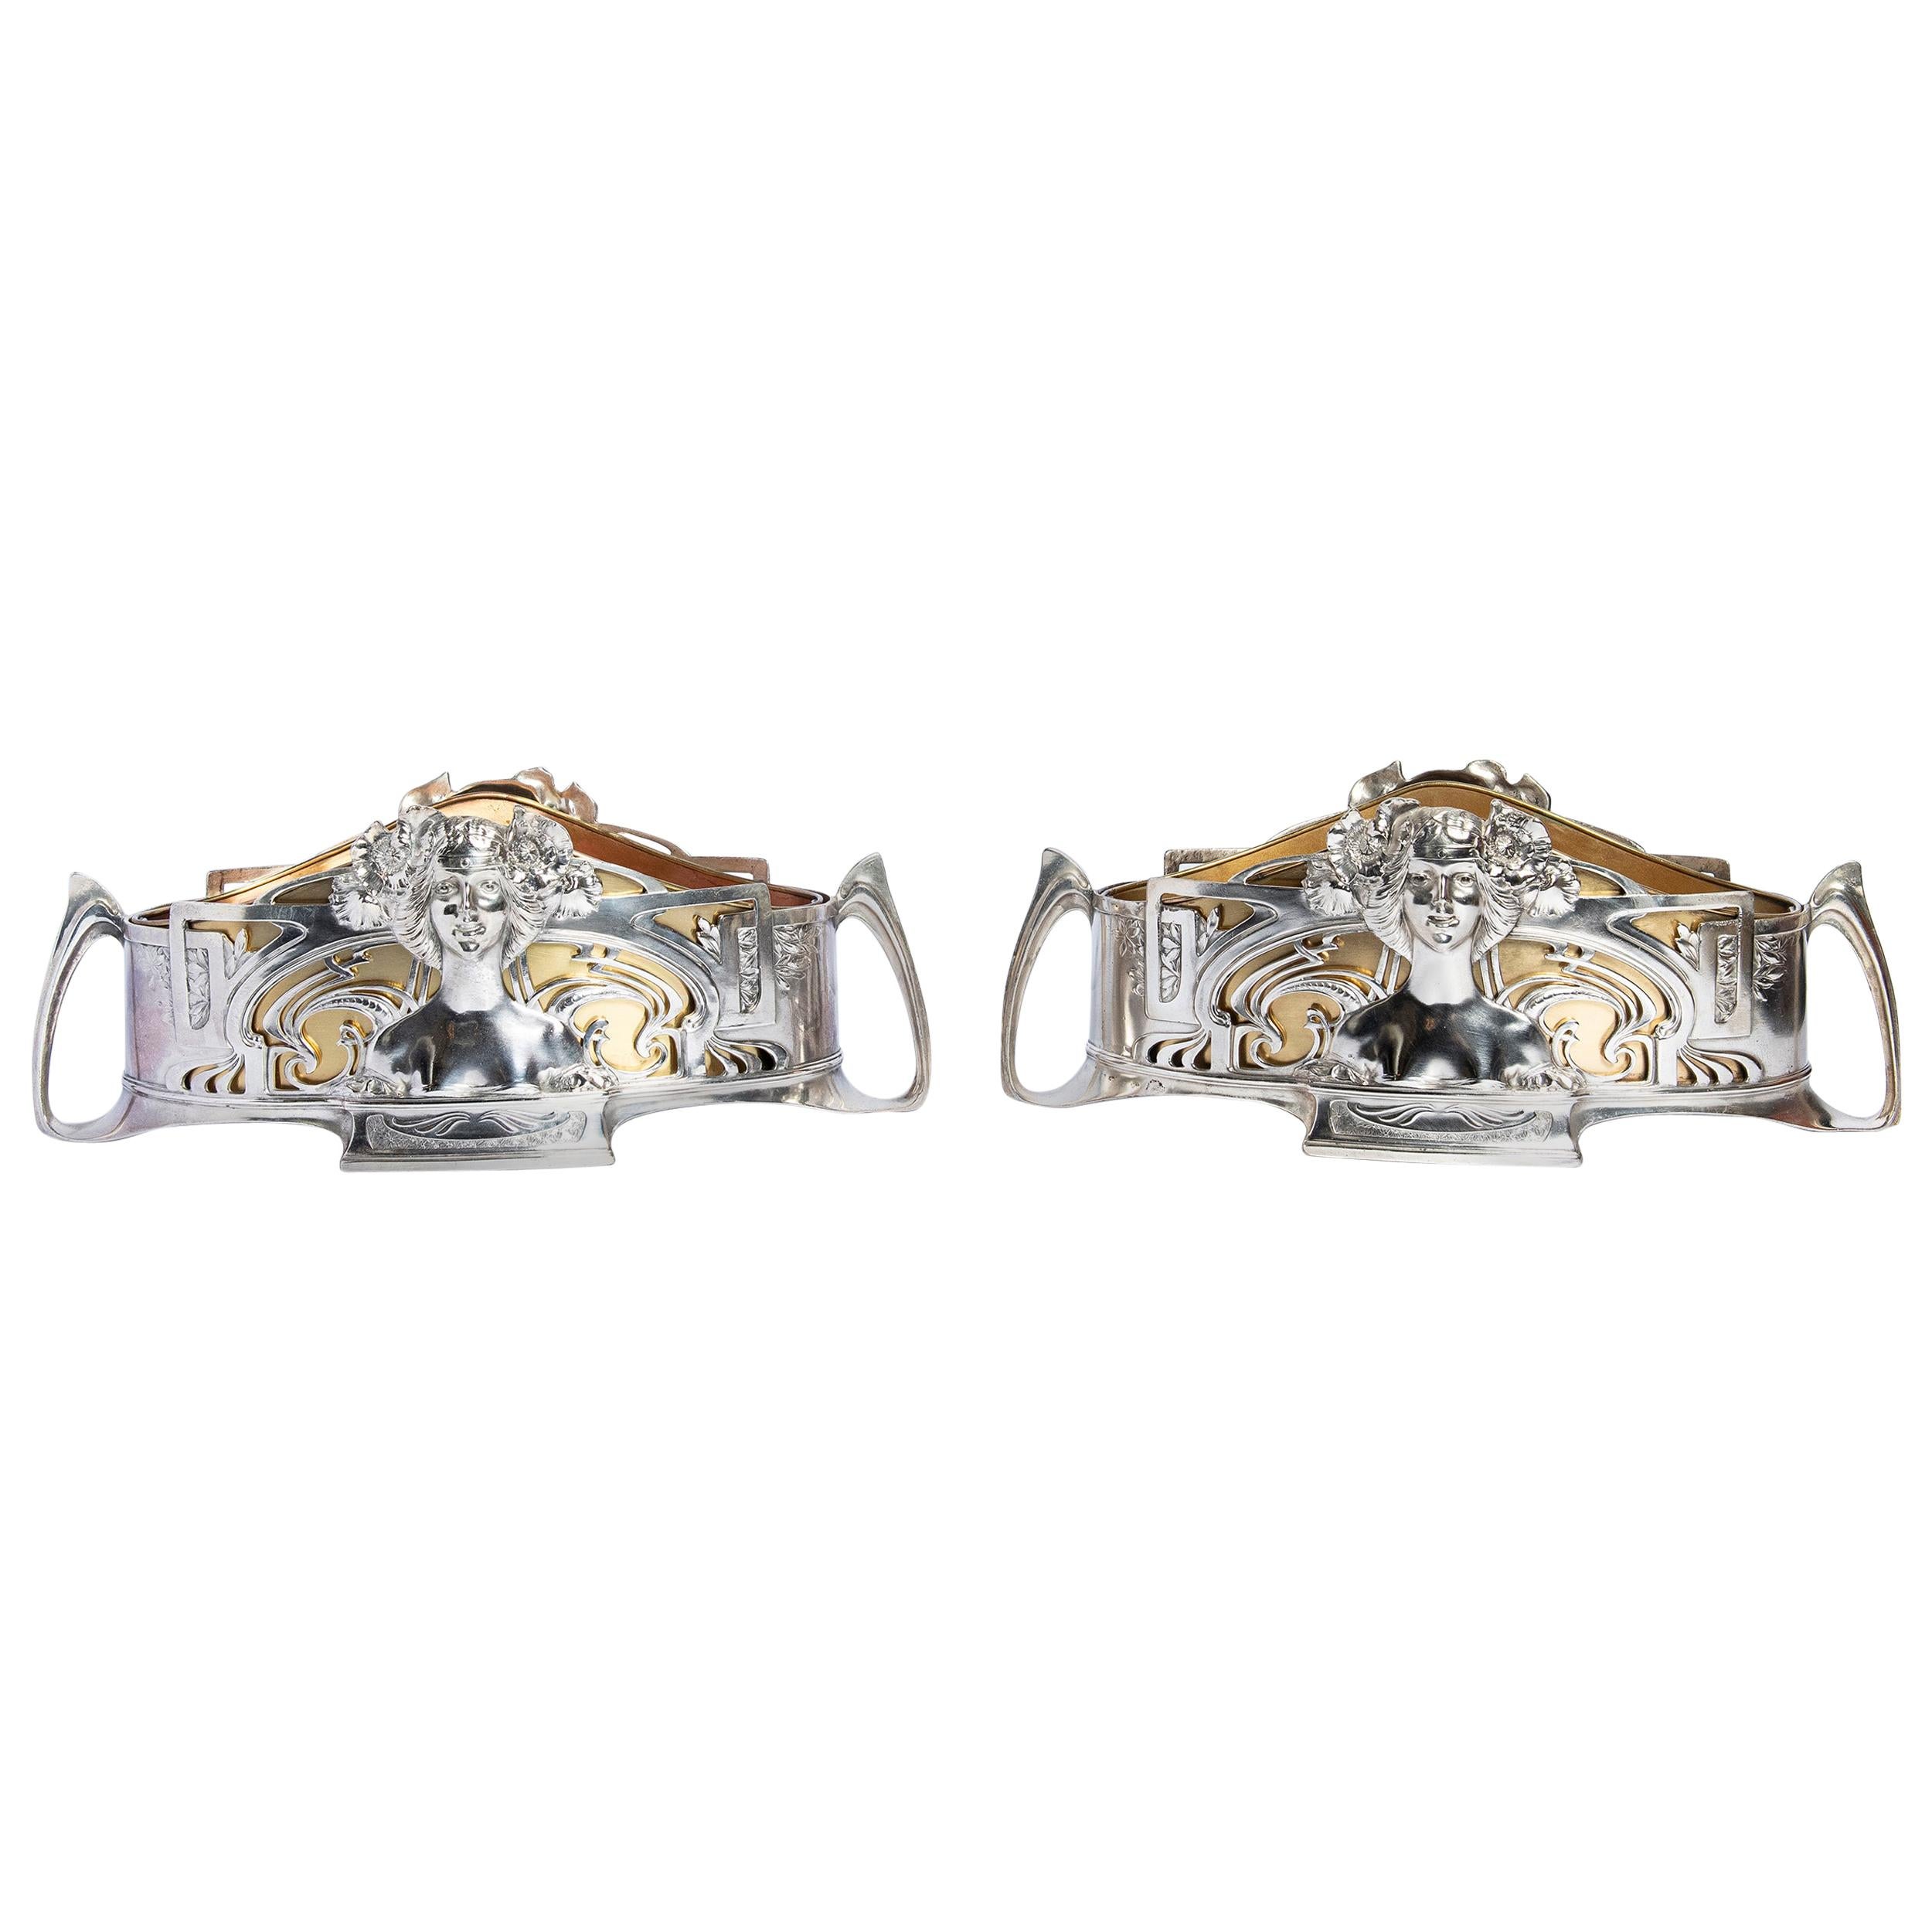 Pair of W.M.F. Silver Plate and Gilt Bronze Jardinière, Jugendstil Period For Sale